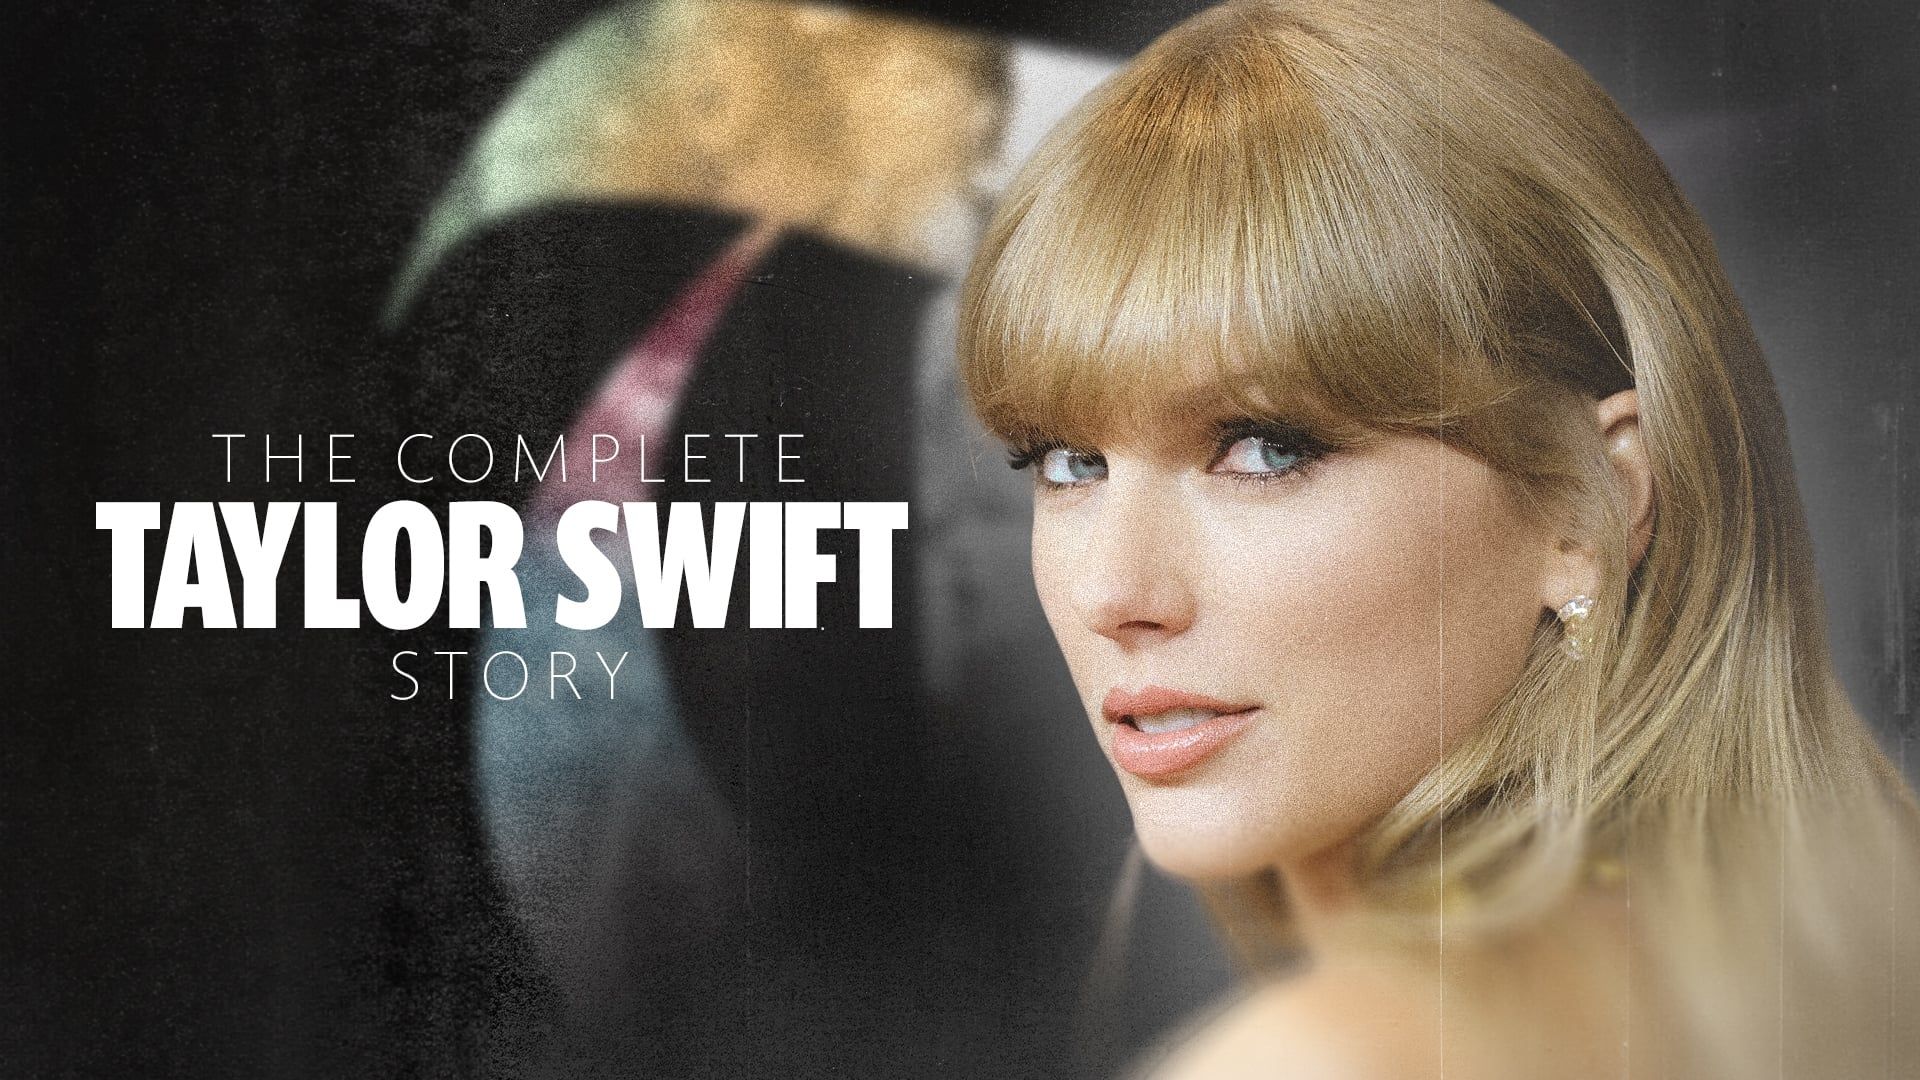 The Complete Taylor Swift Story background